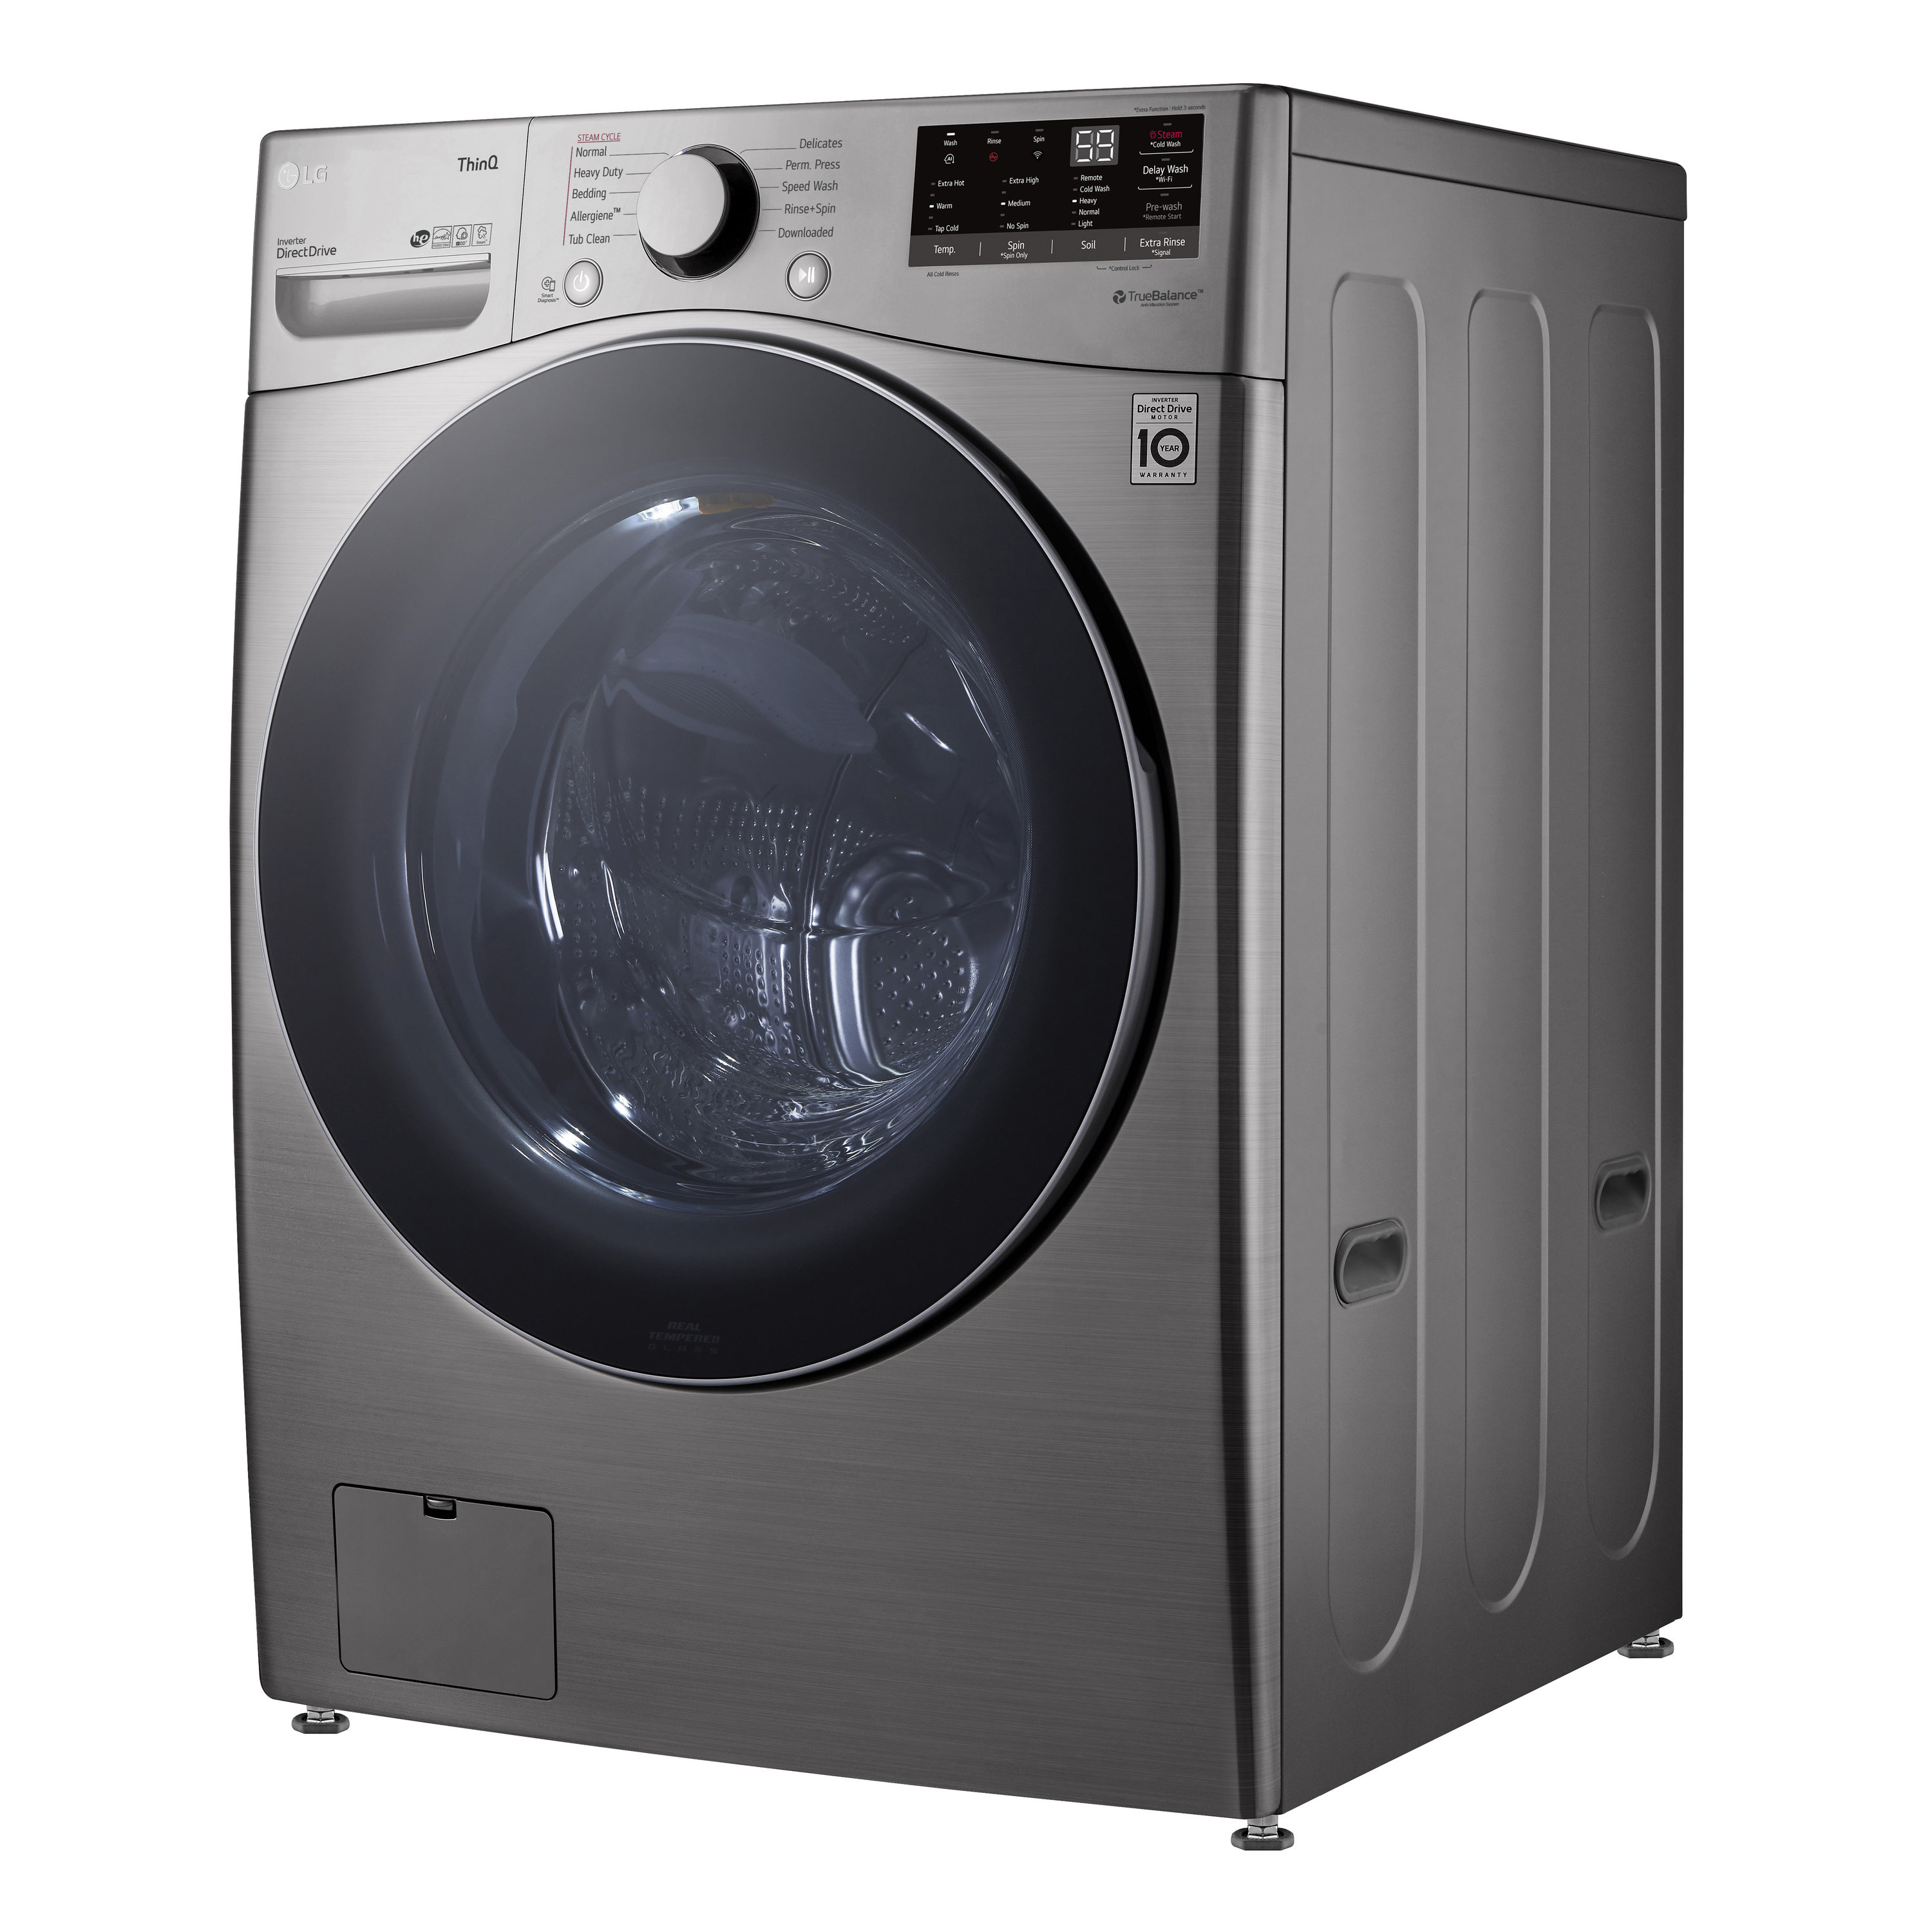 LG 4.5-cu ft High Efficiency Stackable Steam Cycle Smart Washer Steel) STAR in the Front-Load Washers department at Lowes.com